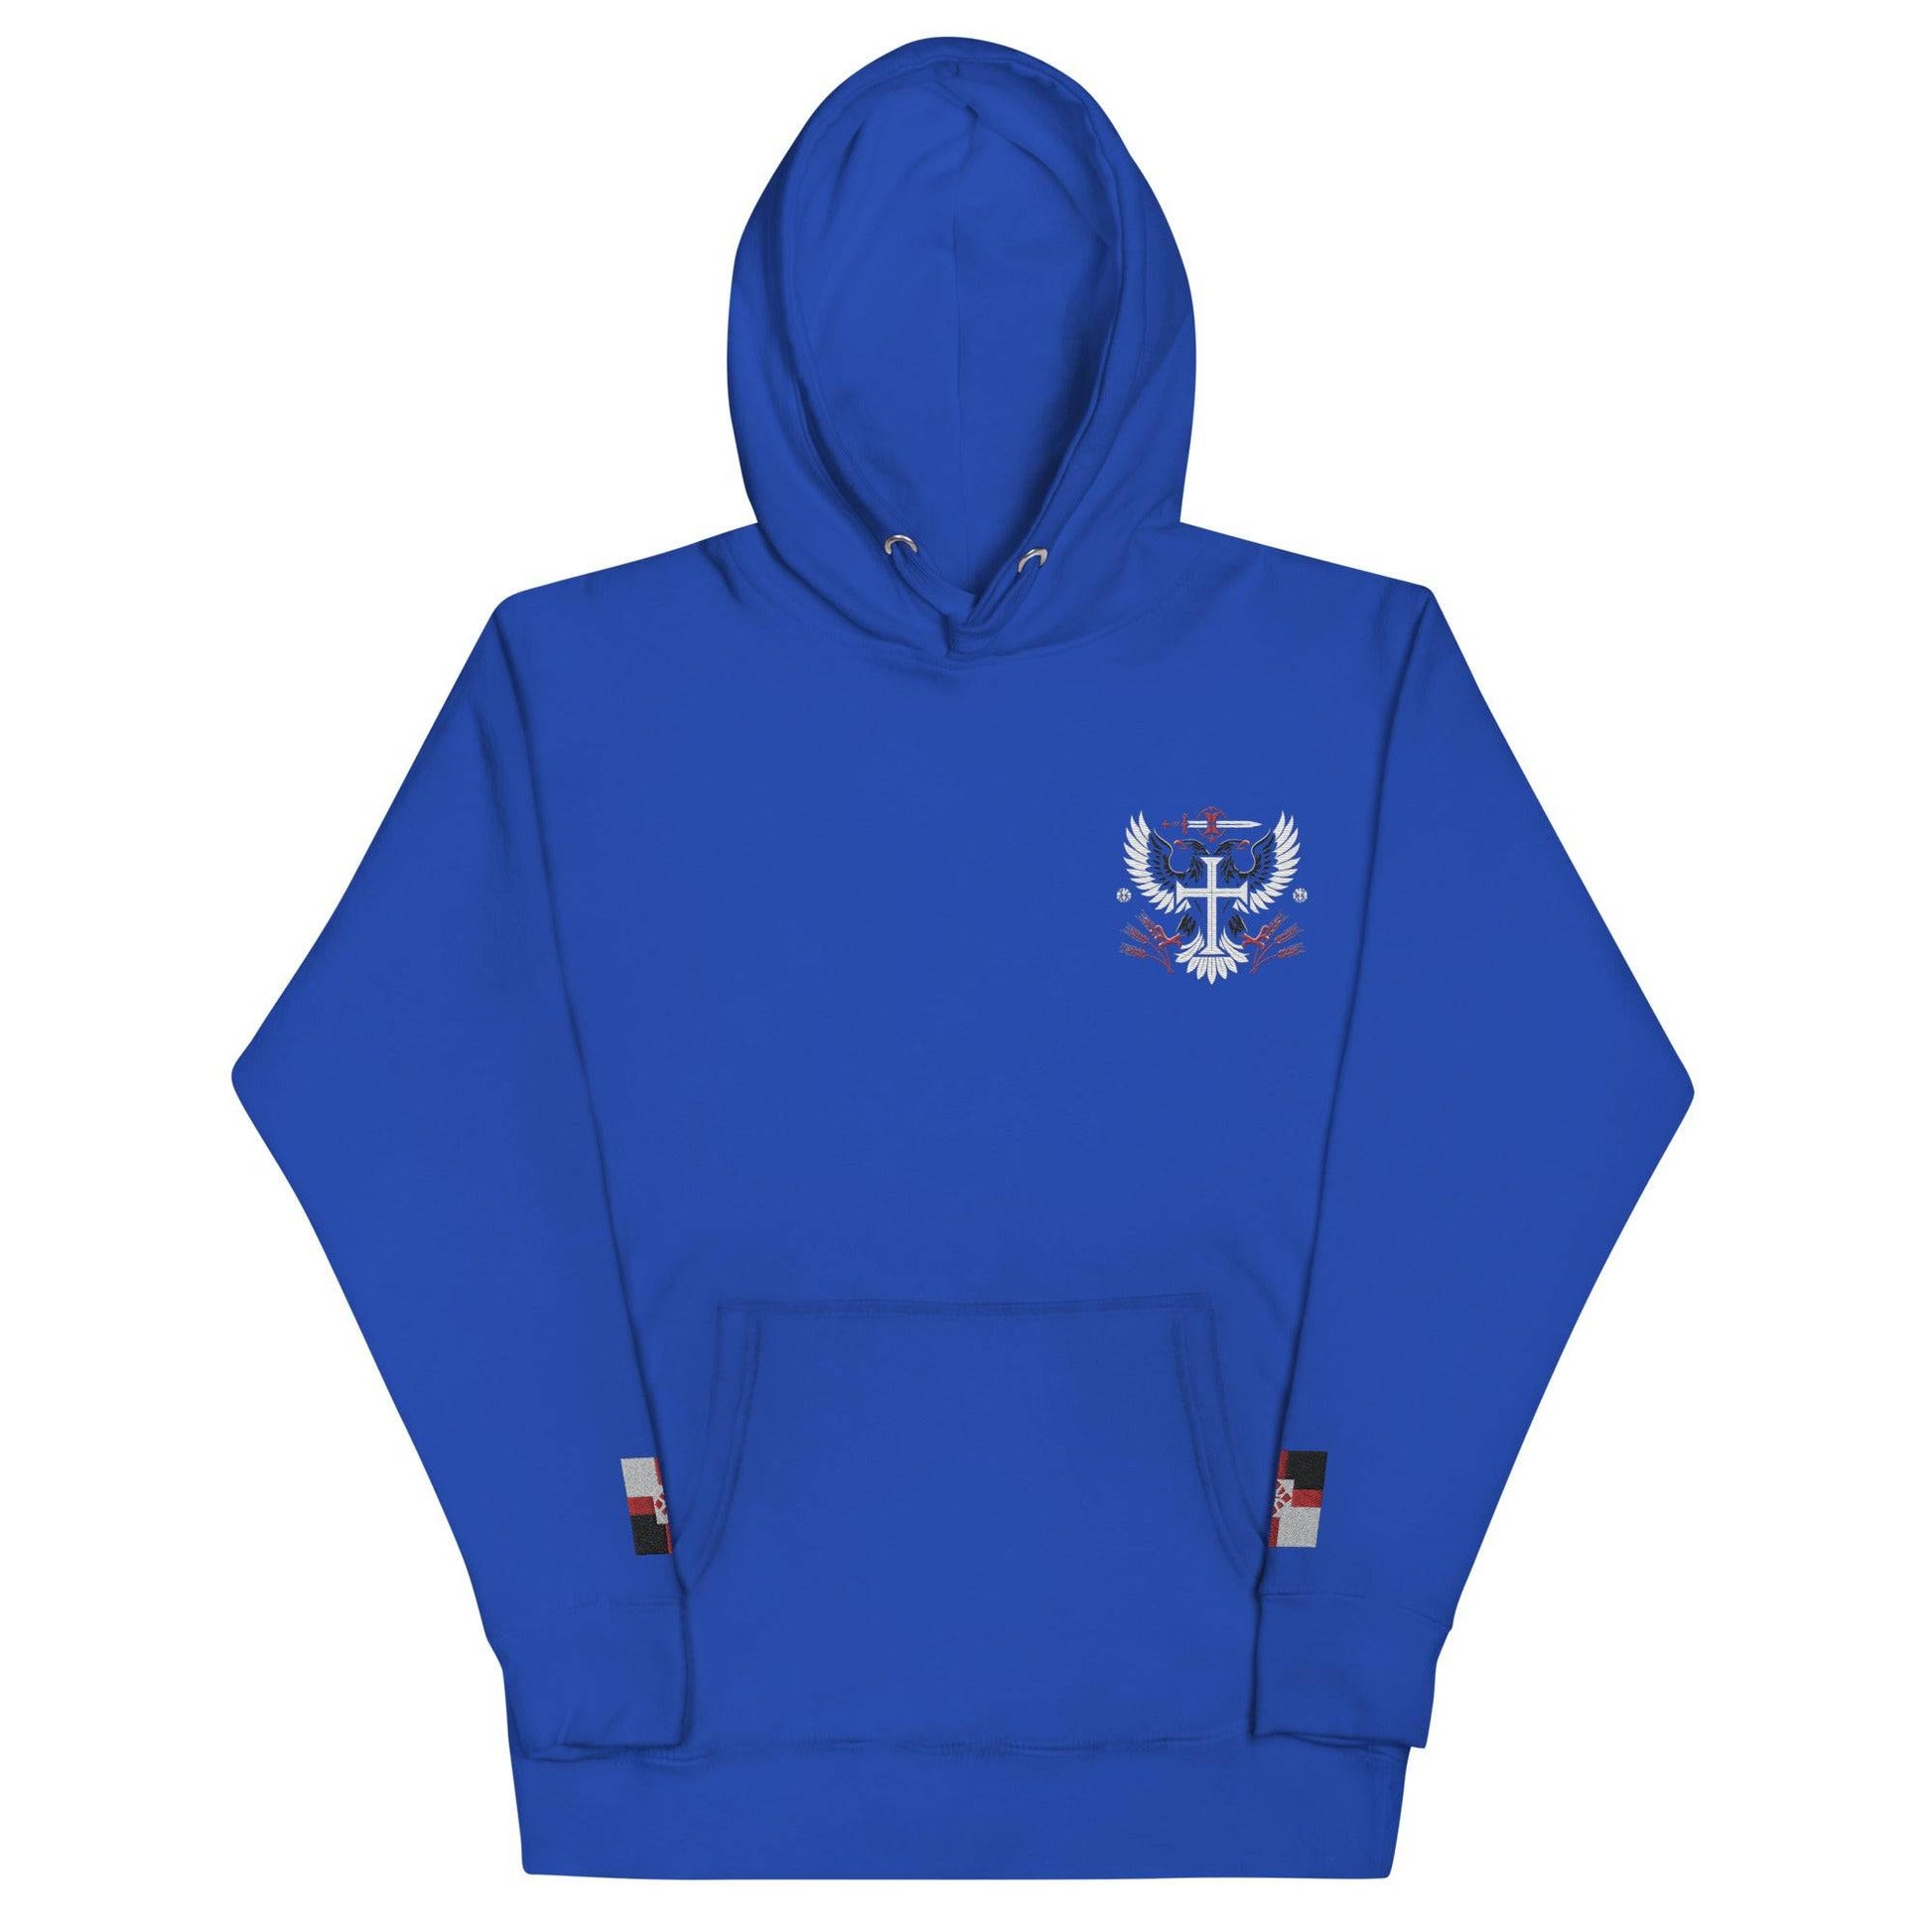 a blue hoodie with a white eagle on it